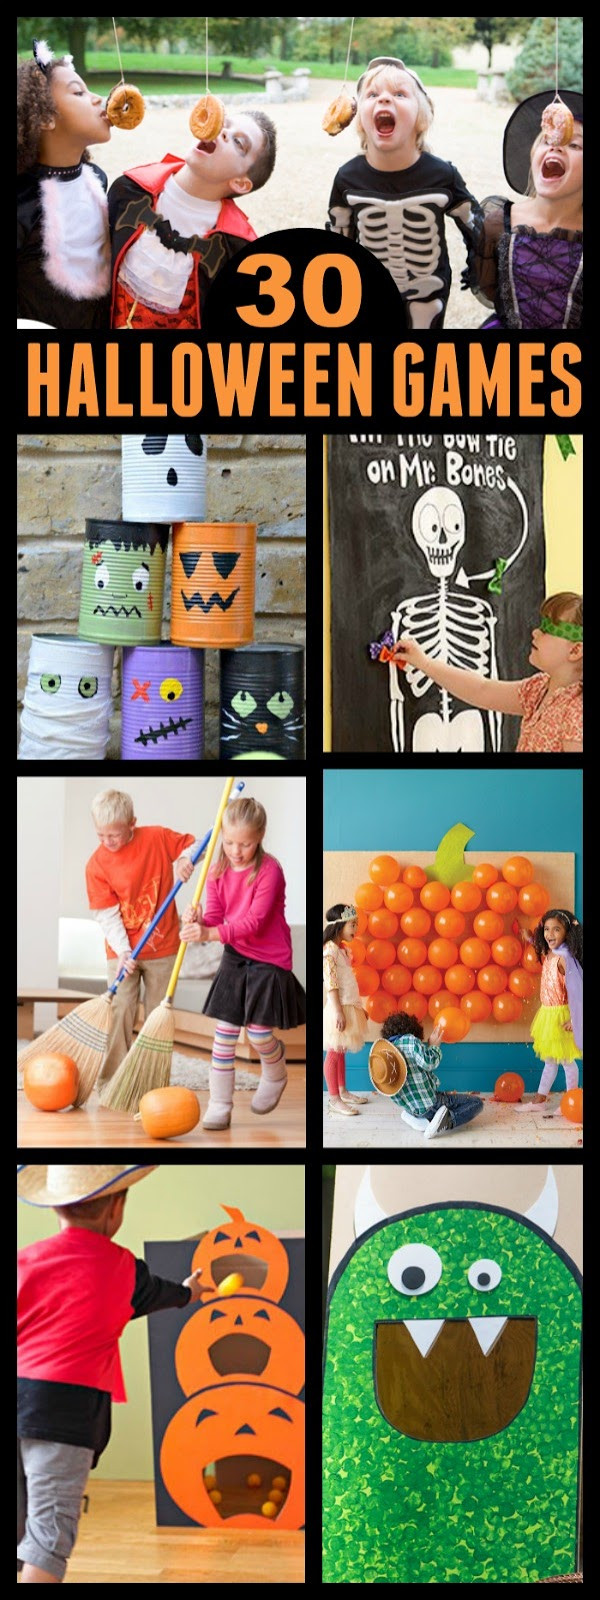 Halloween Party Games Ideas
 Halloween Games for Kids